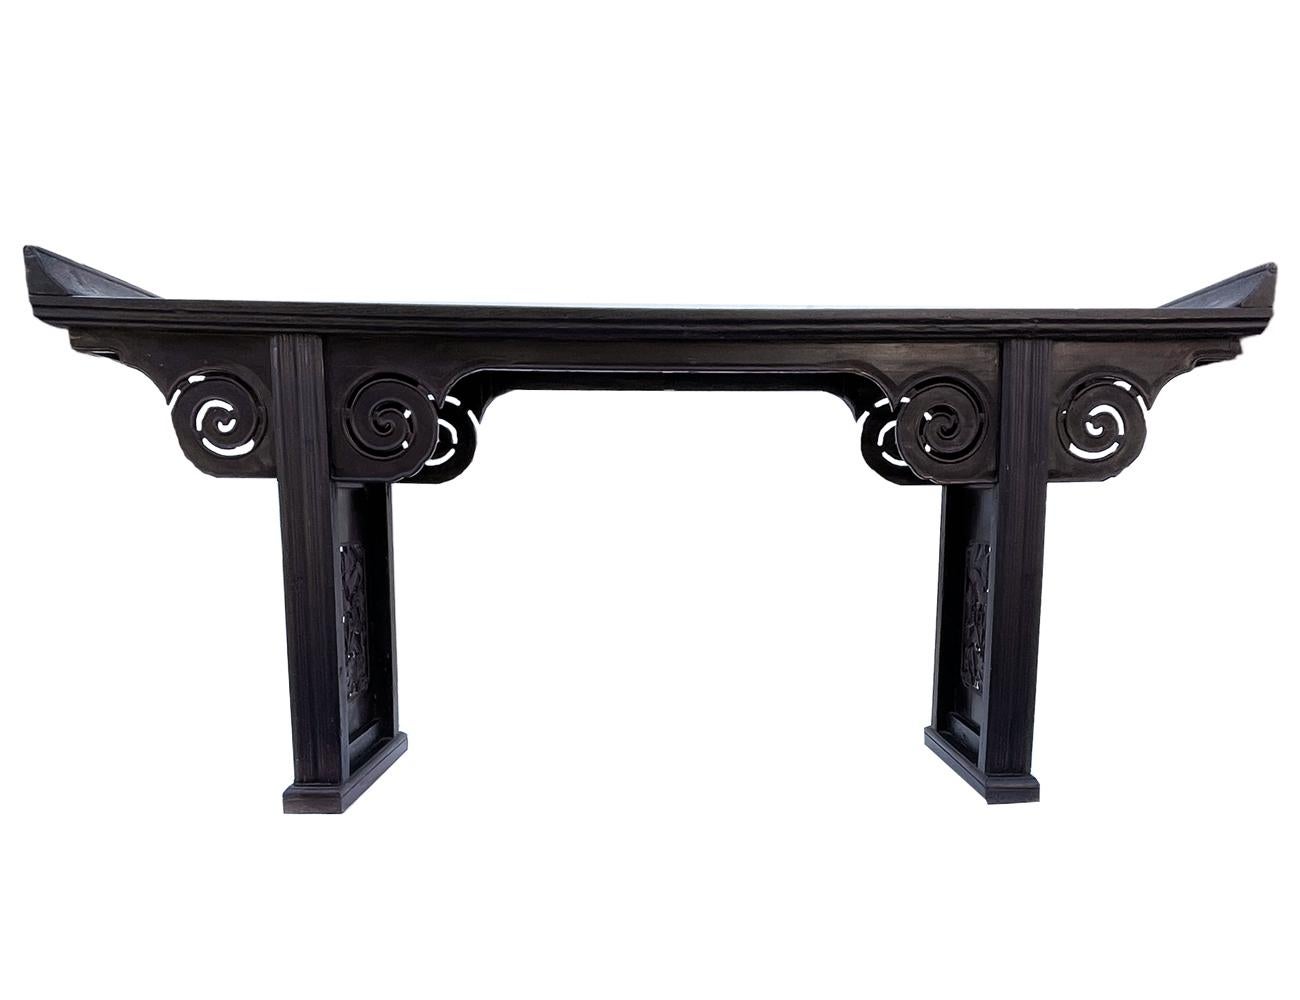 Thai Antique Asian Buddhist Alter as Narrow Hall Table or Console or Sofa Table For Sale